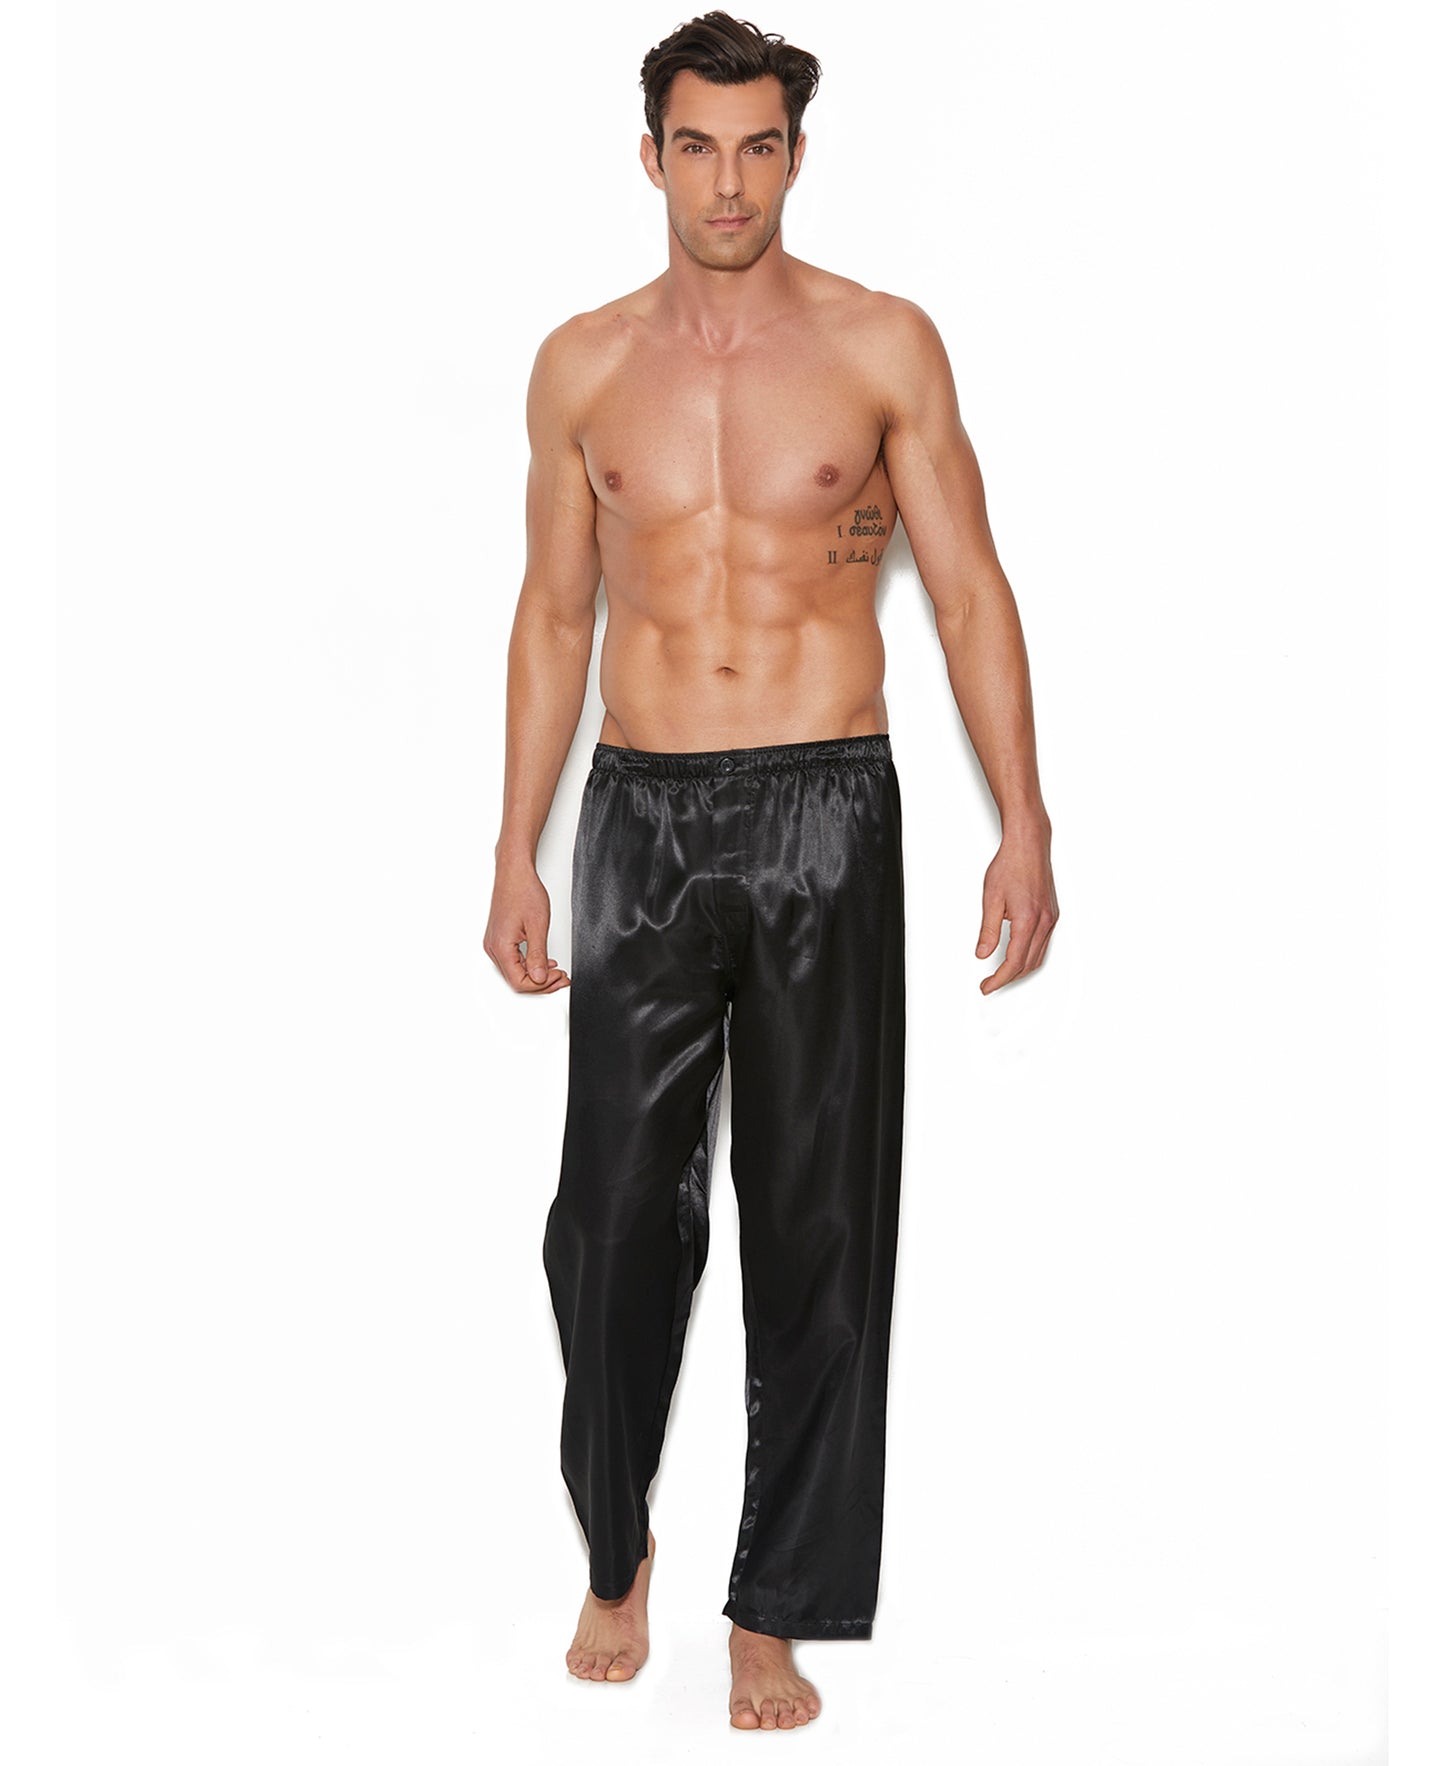 3015 Charmeuse Satin Unisex Pants front view pic 2